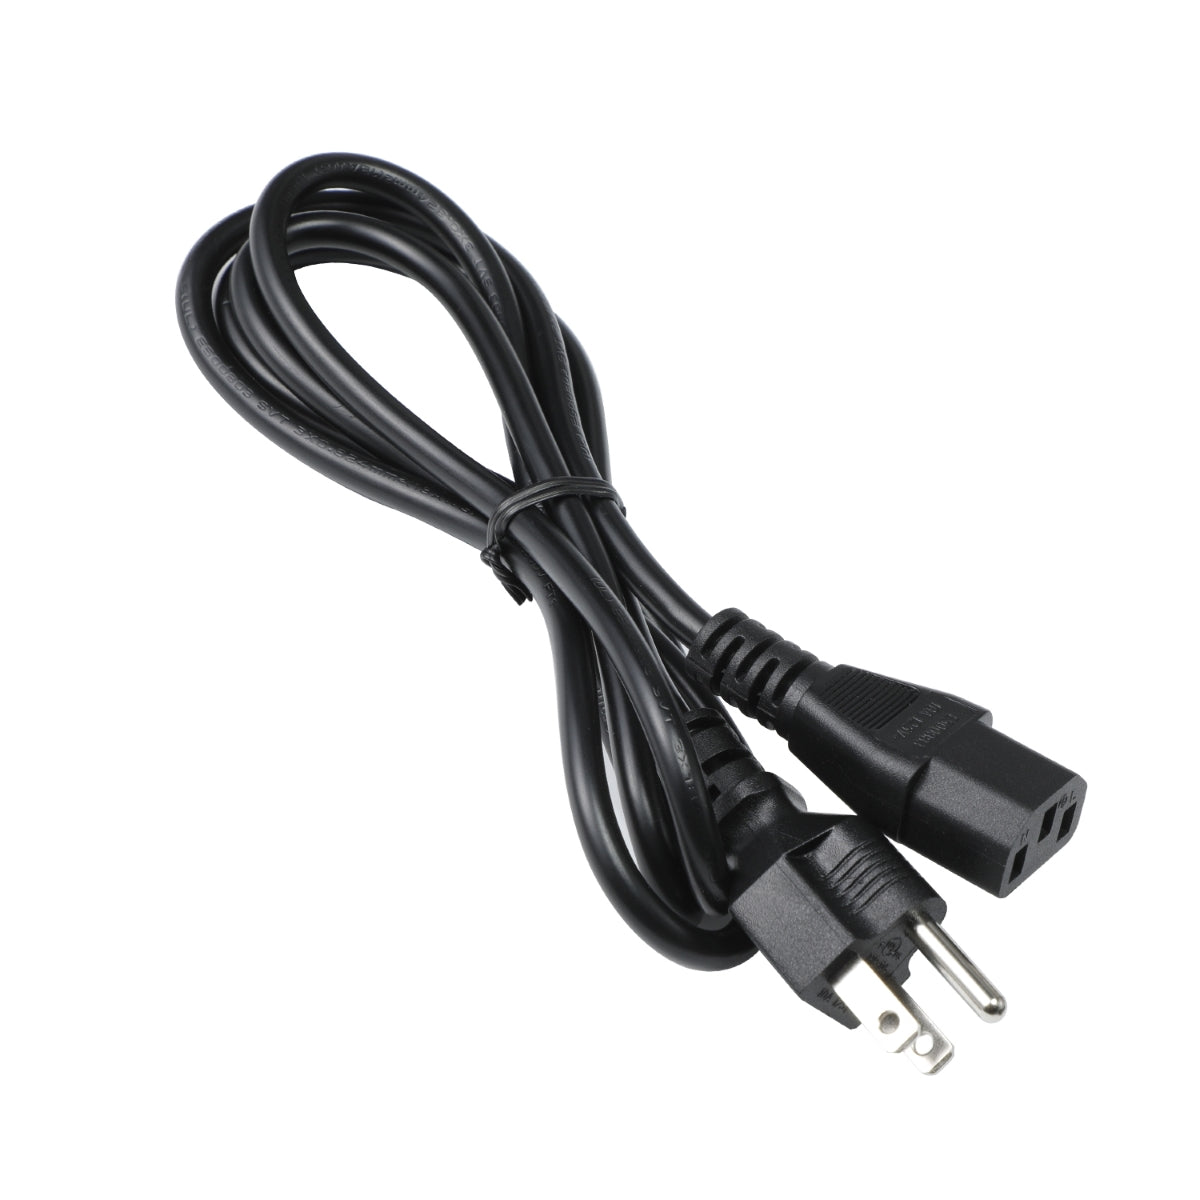 Power Cord for Acer XB253Q GZbmiiprzx Monitor